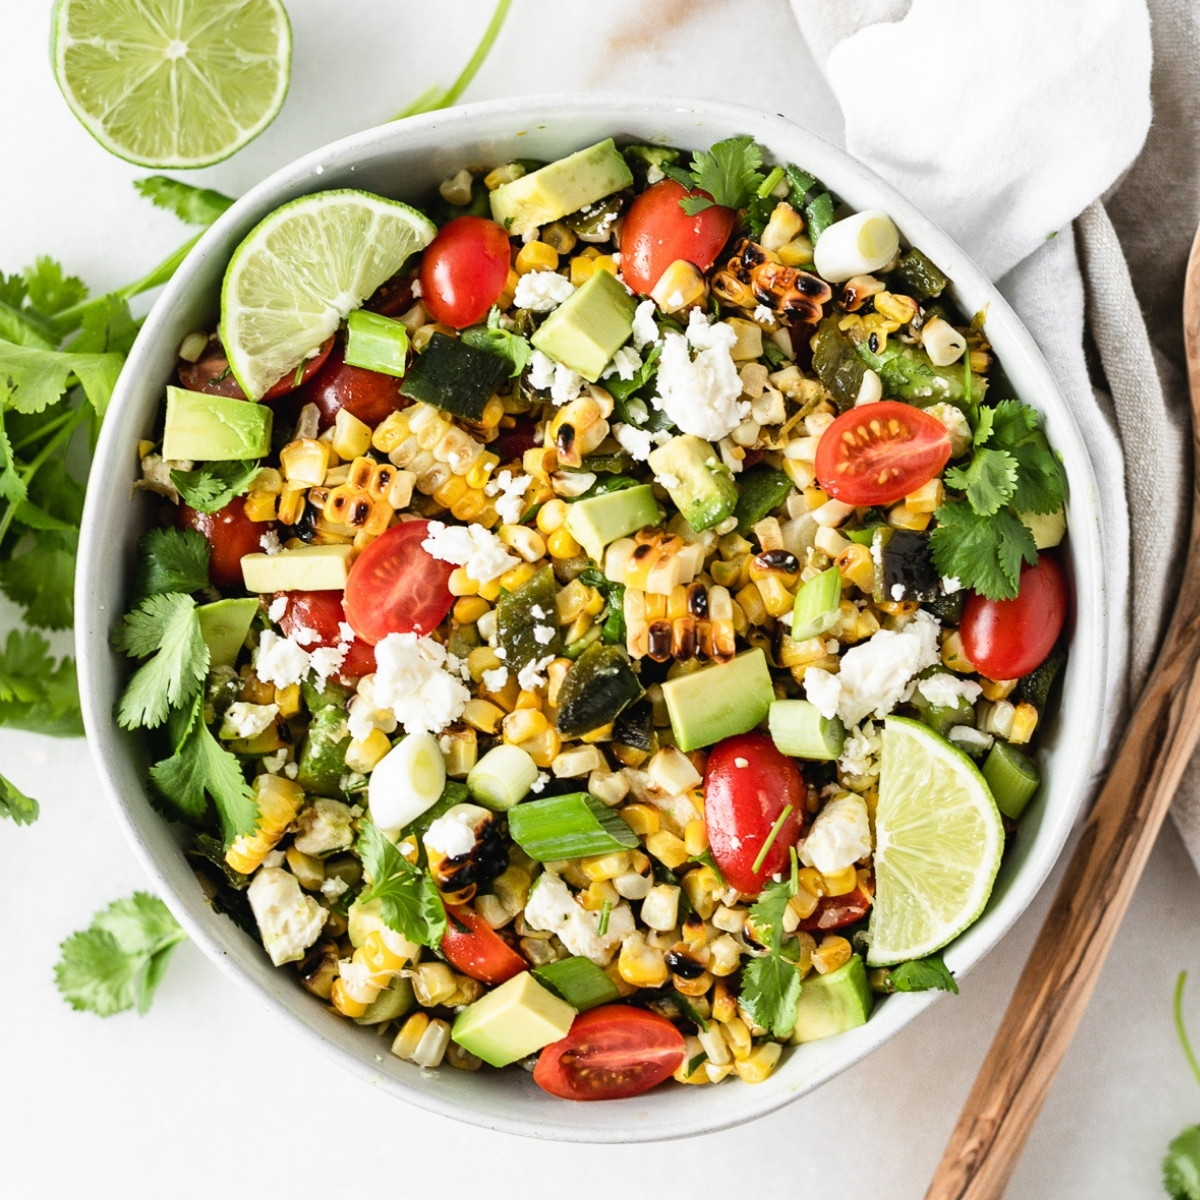 This grilled corn summer salad features grilled fresh corn and poblanos with fresh tomatoes and avocado for a delicious summer salad that's perfect for cookouts! (gluten-free, vegetarian) | via livelytable.com